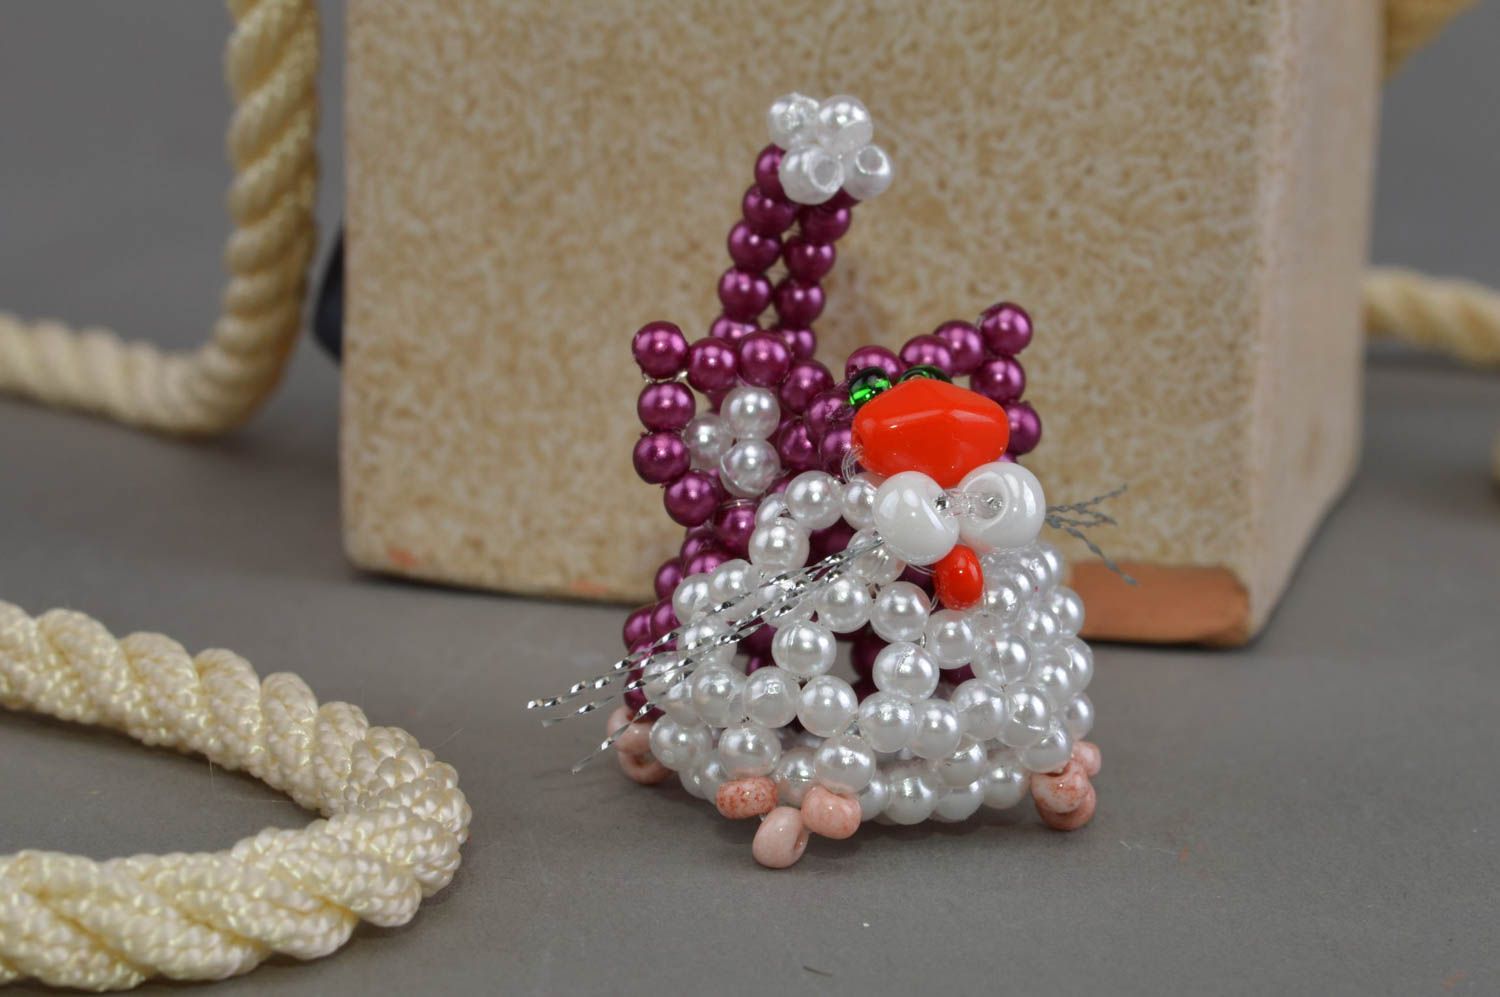 Handmade miniature beaded figurine of white and violet cat for home decor photo 1